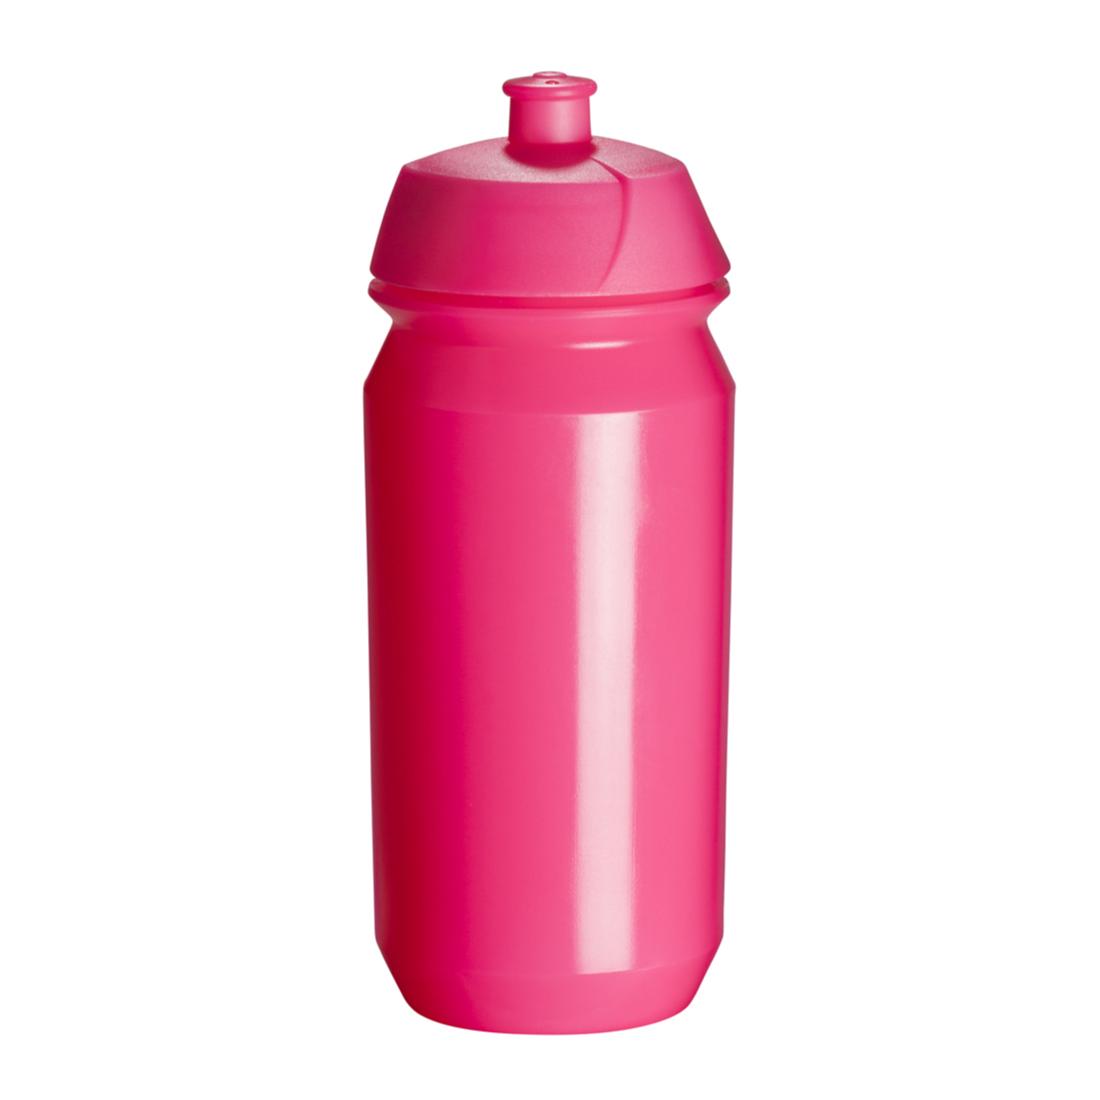 https://bicyclewaterbottle.com/wp-content/uploads/2019/11/tacx-shiva-bicycle-sport-water-bottle-500ml-pink-fluo.jpg